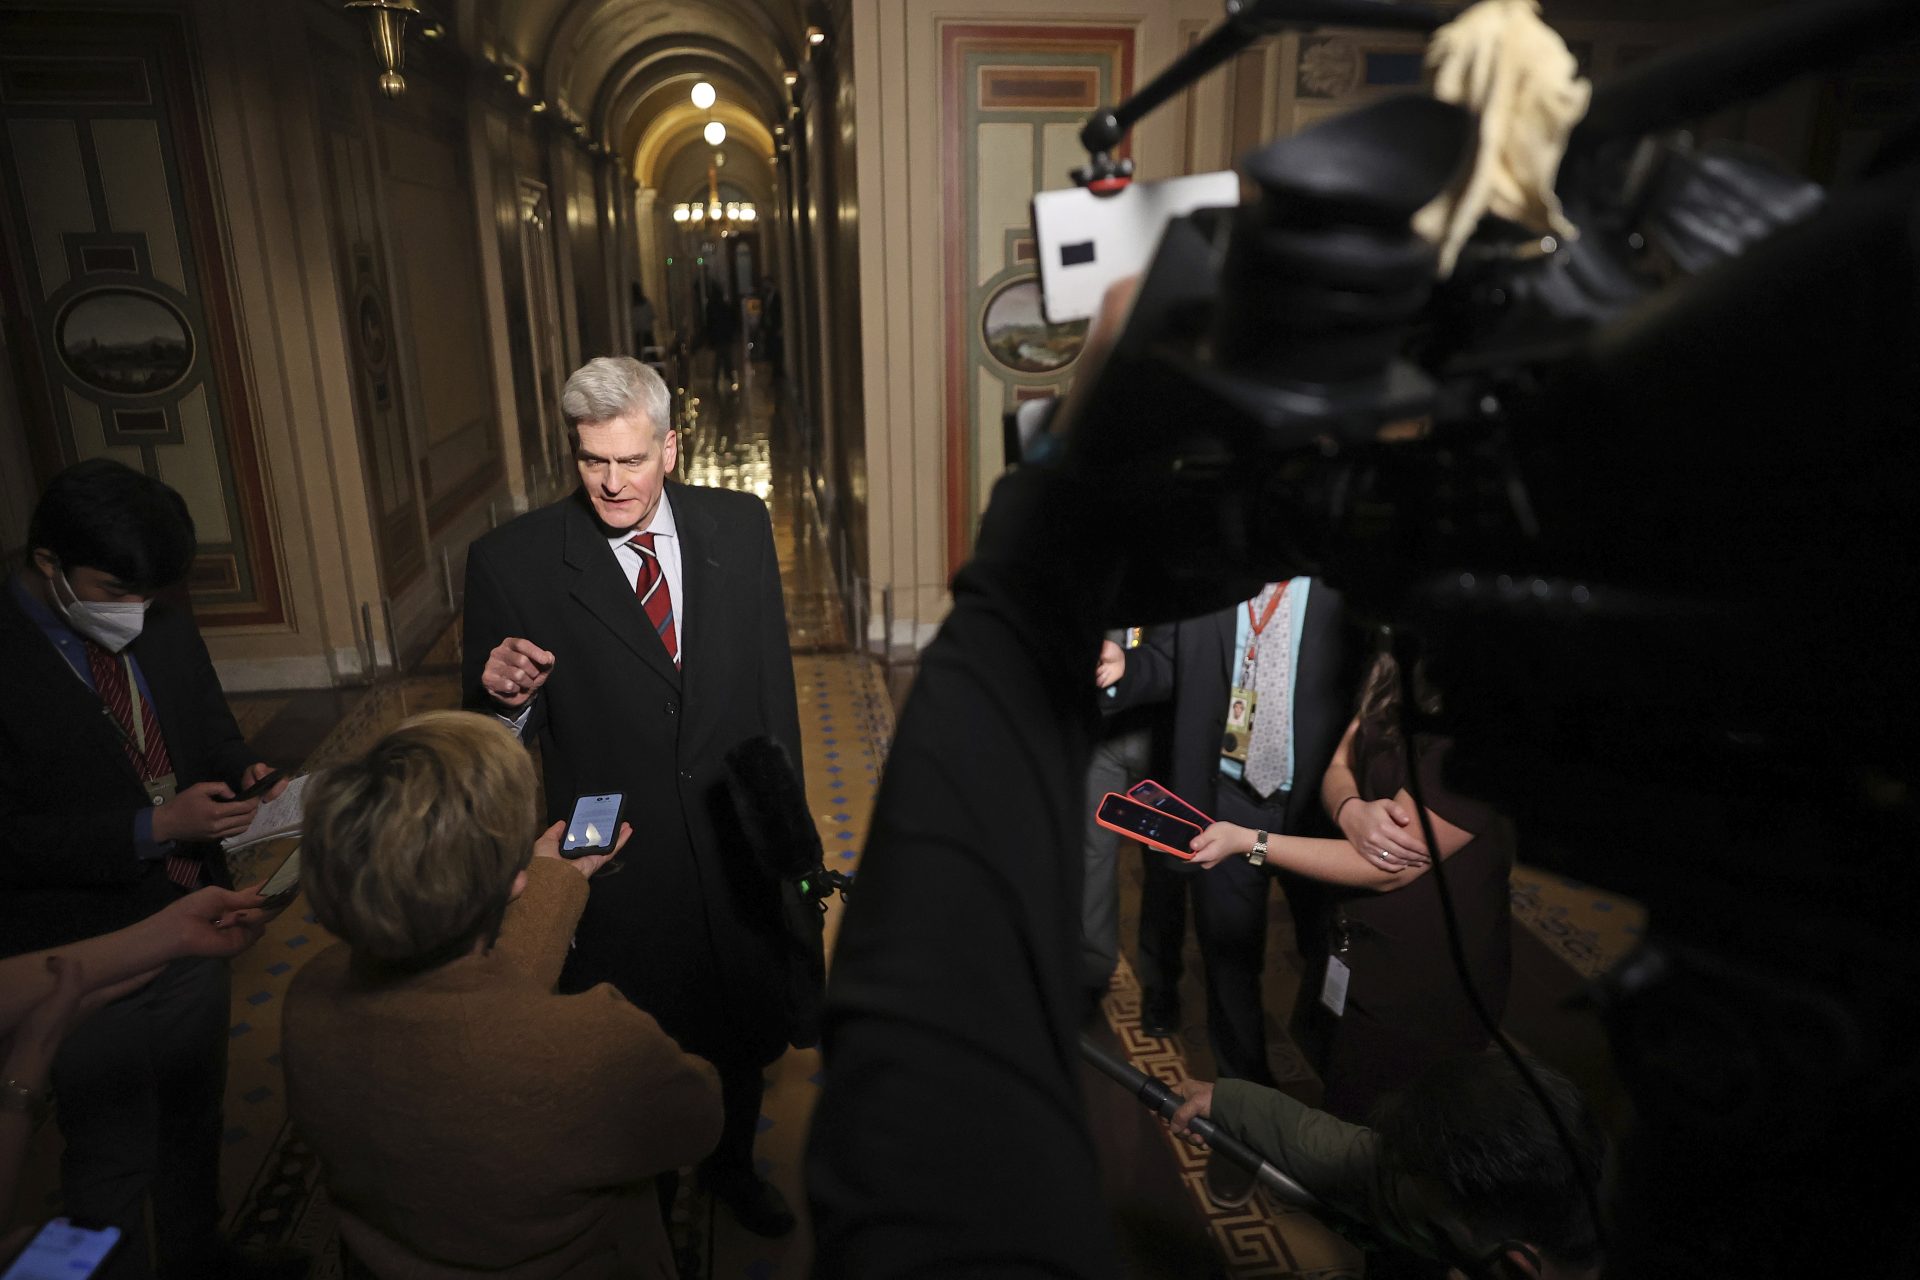 Sen. Bill Cassidy, R-La., talks with reporters as he leaves the U.S. Capitol after the first day of Trump's second impeachment trial in the Senate, Tuesday, Feb. 9, 2021, in Washington.